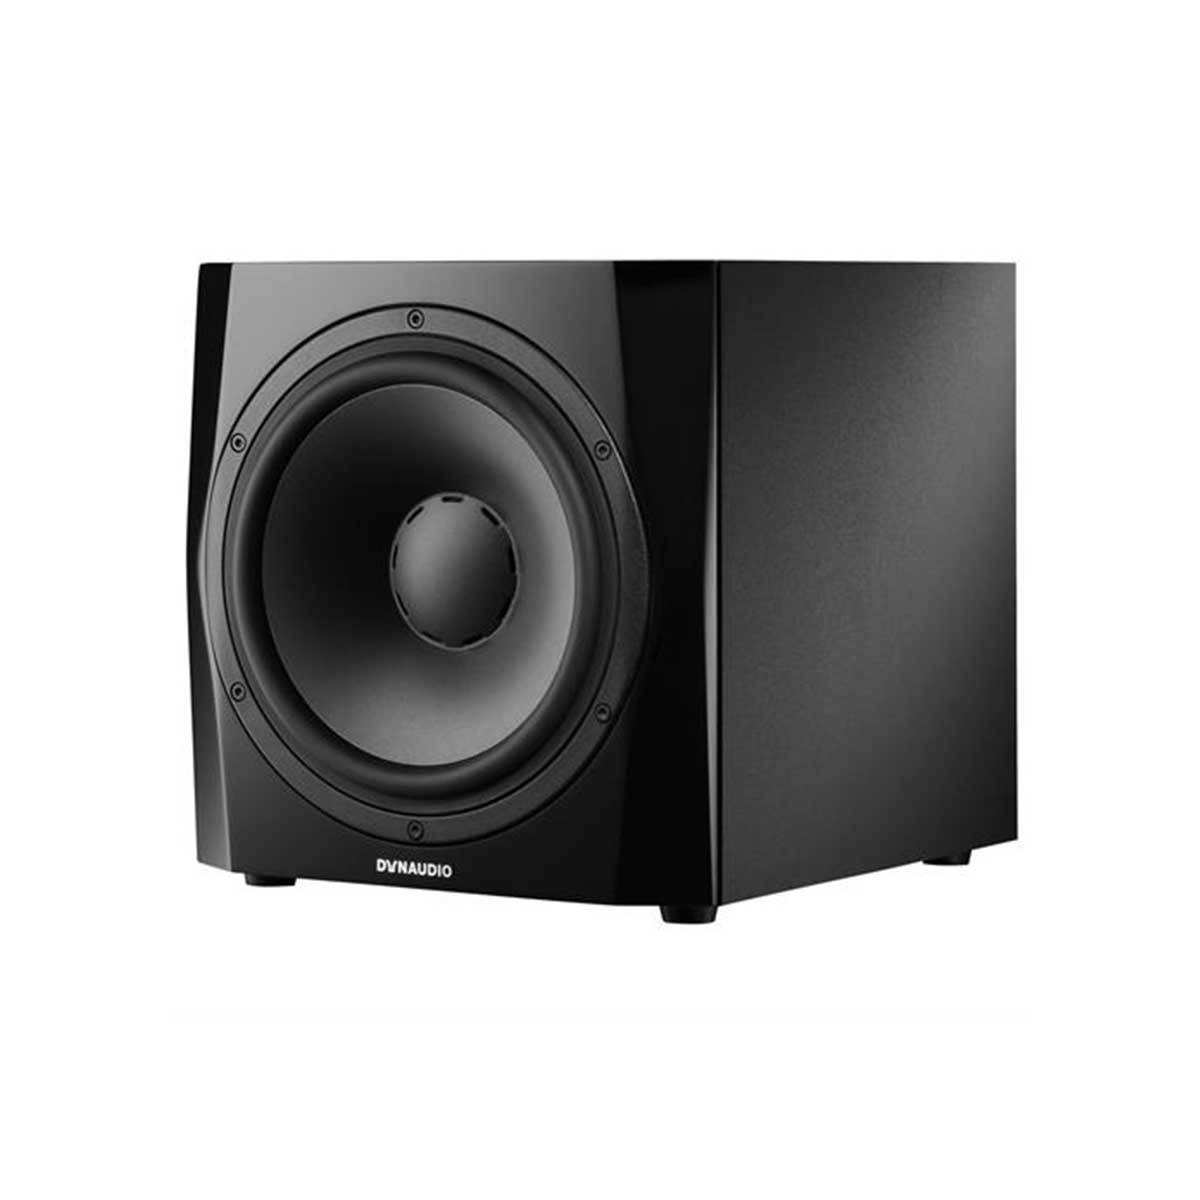 Subwoofers - Dynaudio 9S 300W 9.5" Subwoofer